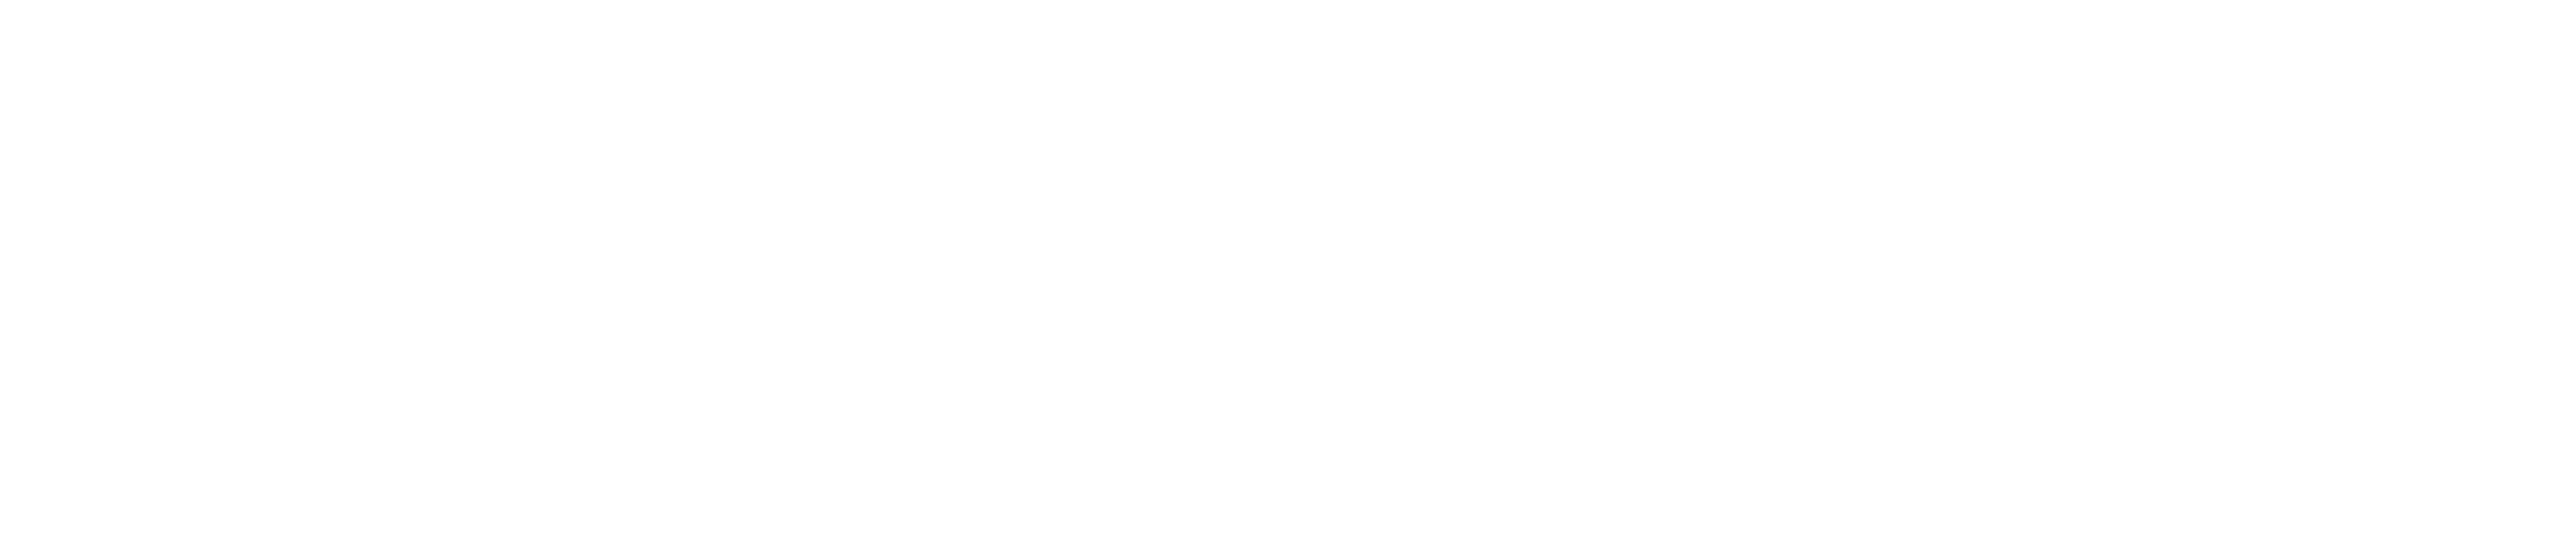 Black and White Cross Logo - Logo – Usage and Guidance - The Church in Wales